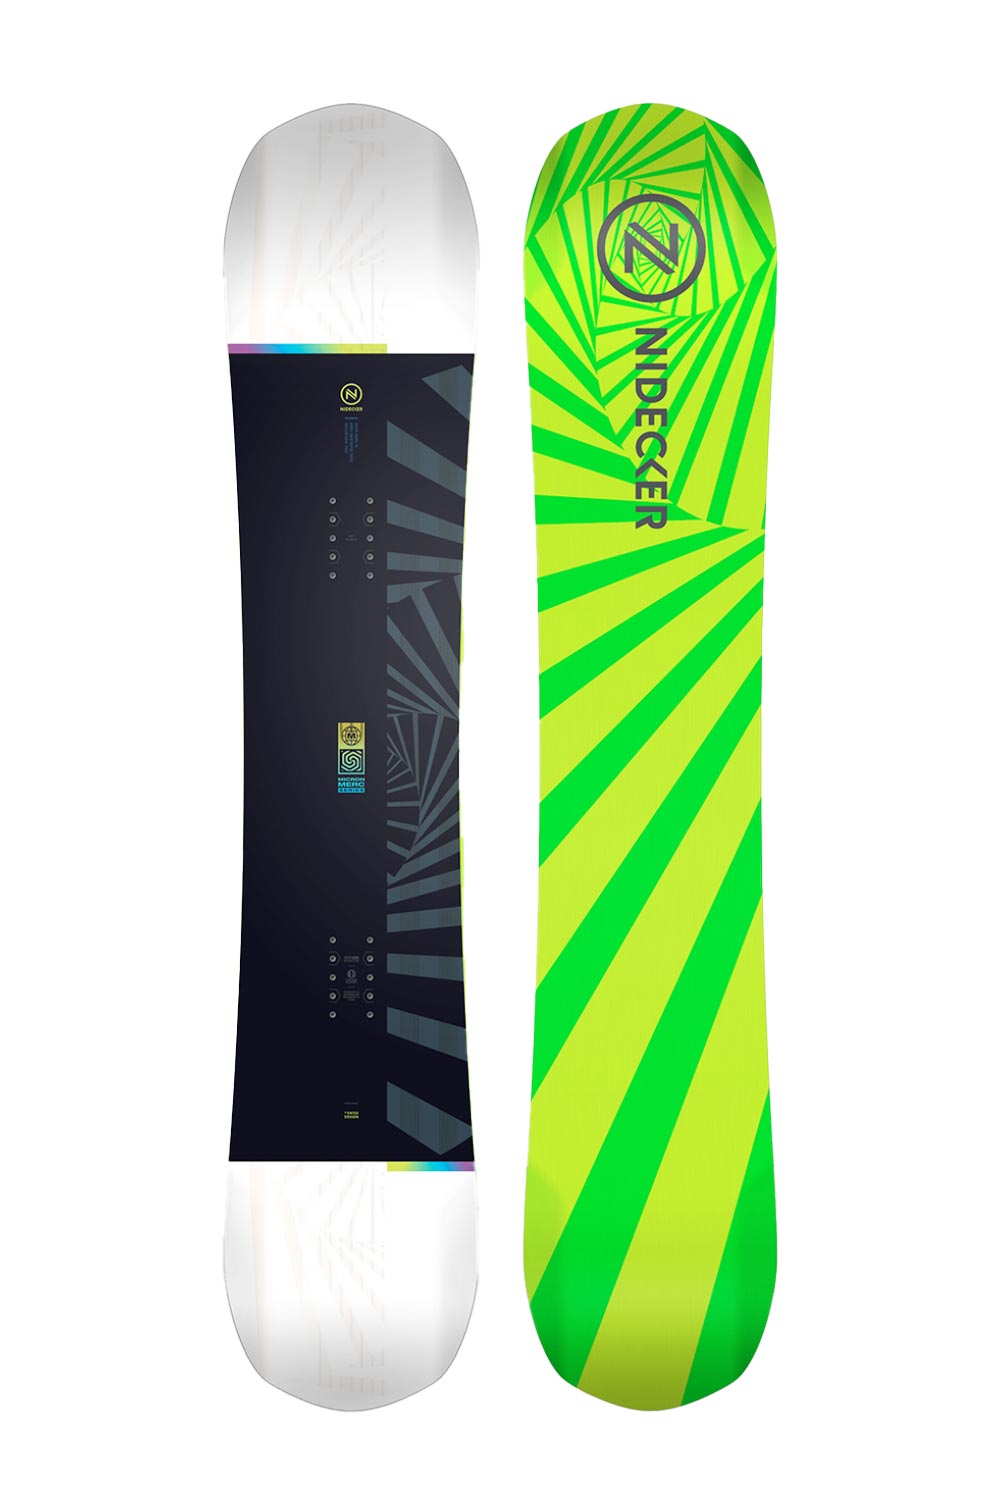 Nidecker Micron Merc Youth Snowboard, black and white on top, bright green on bottom